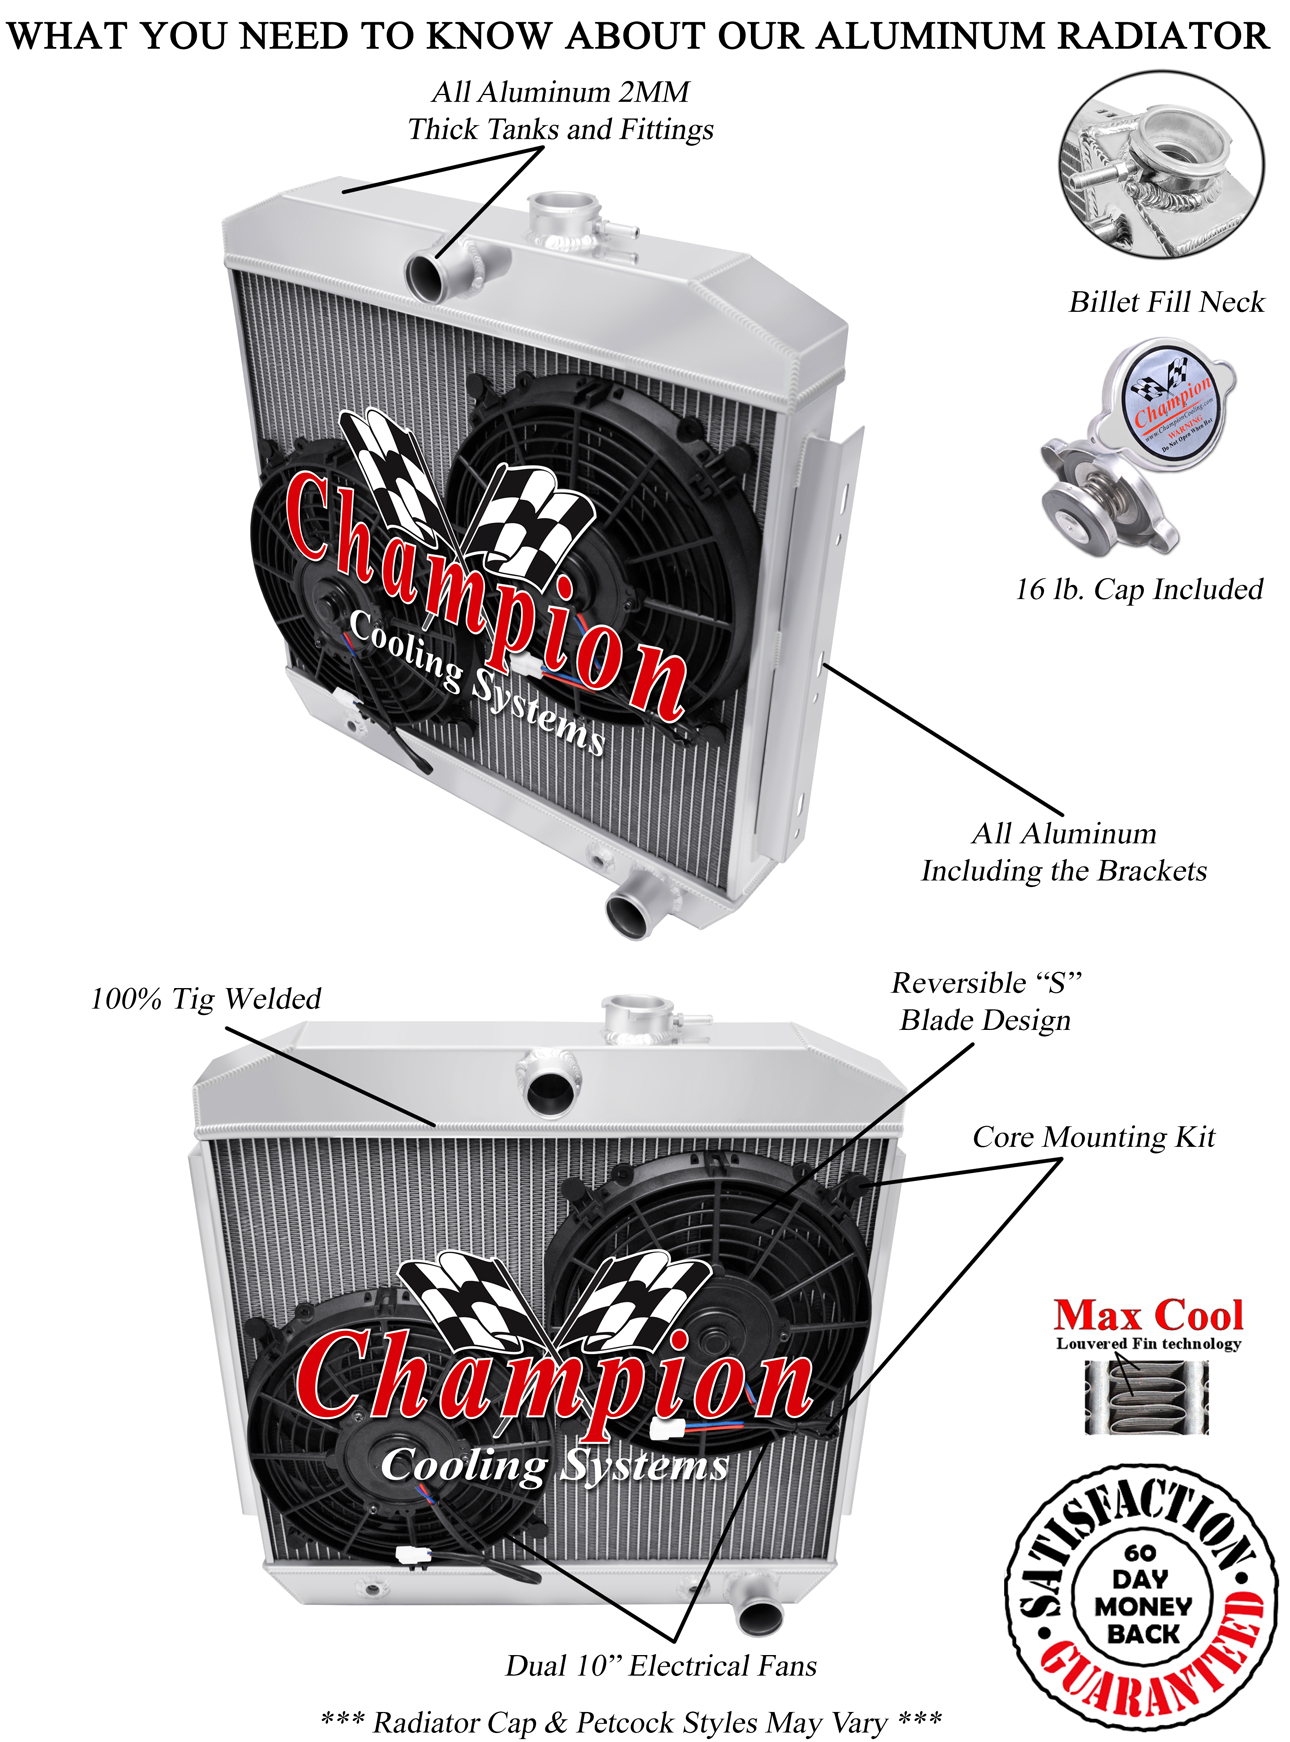 http://www.championcooling.com/photos/Photos%20White/With%20Fans/Combos/5057/5057%20W%20FAN.JPG